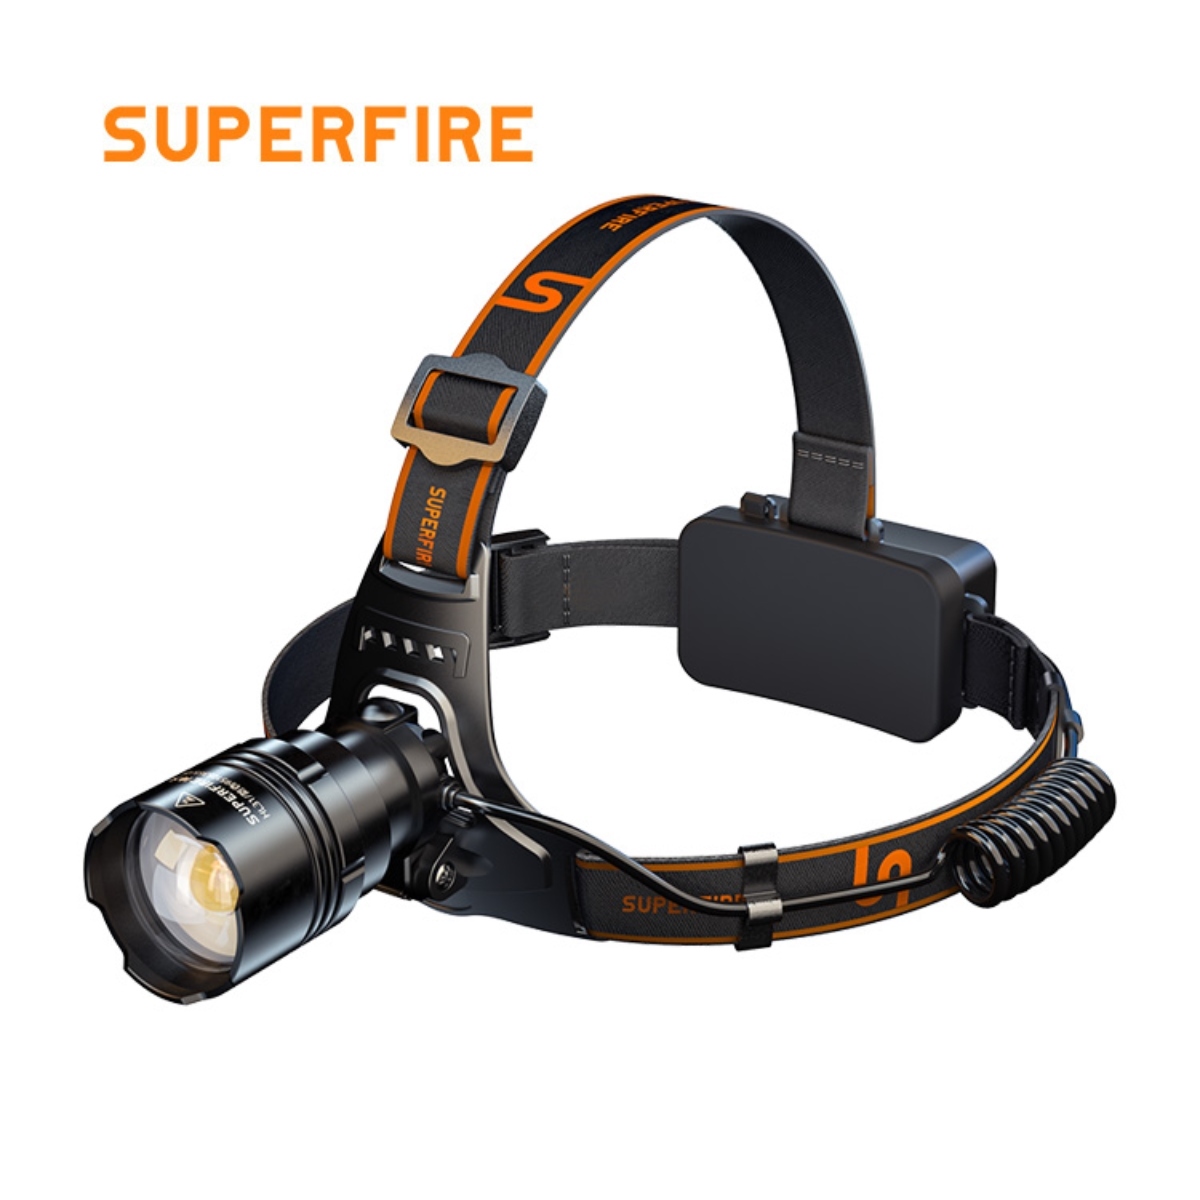 SUPERFIRE HL31 Zoomable Flashlight